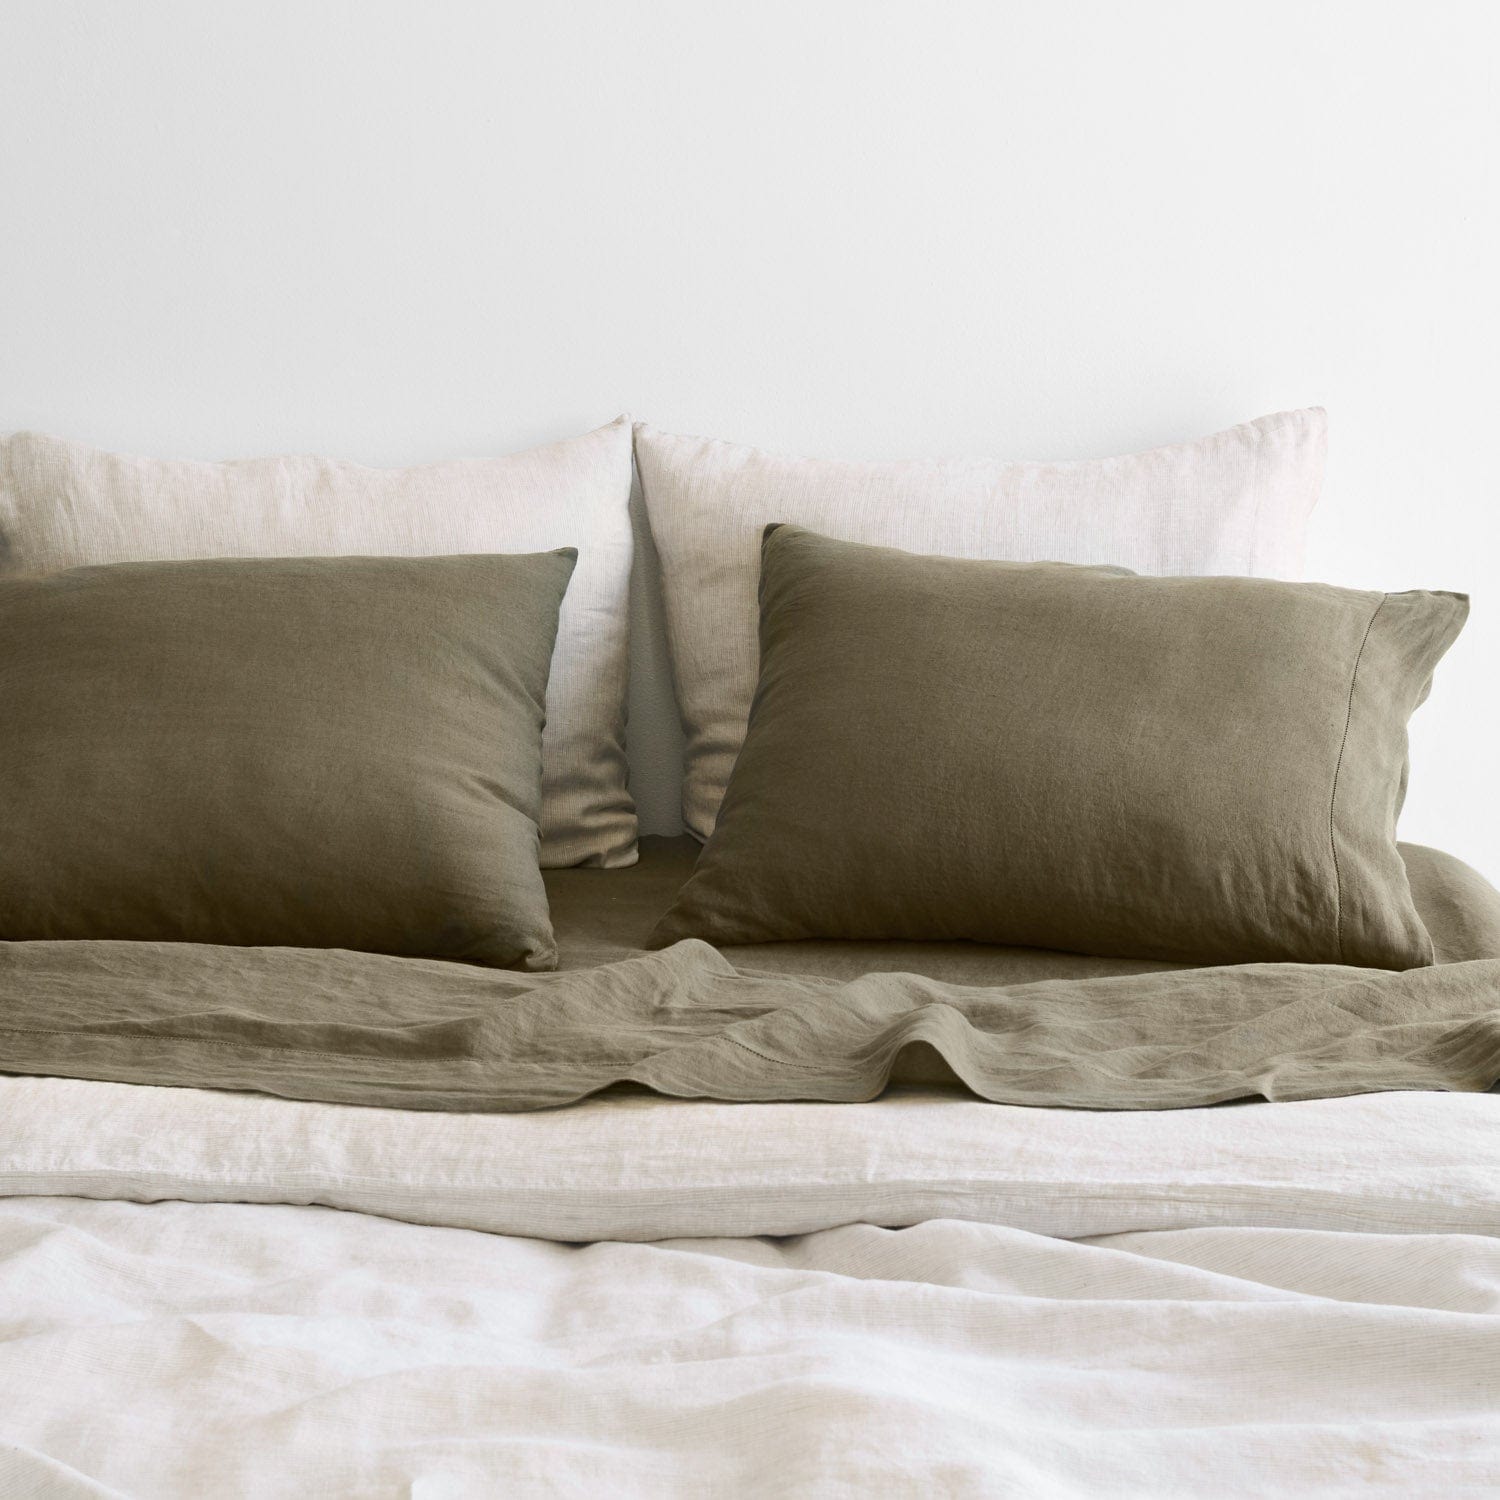 At Home with T&C: Why Everyone Needs Two Duvets on the Bed